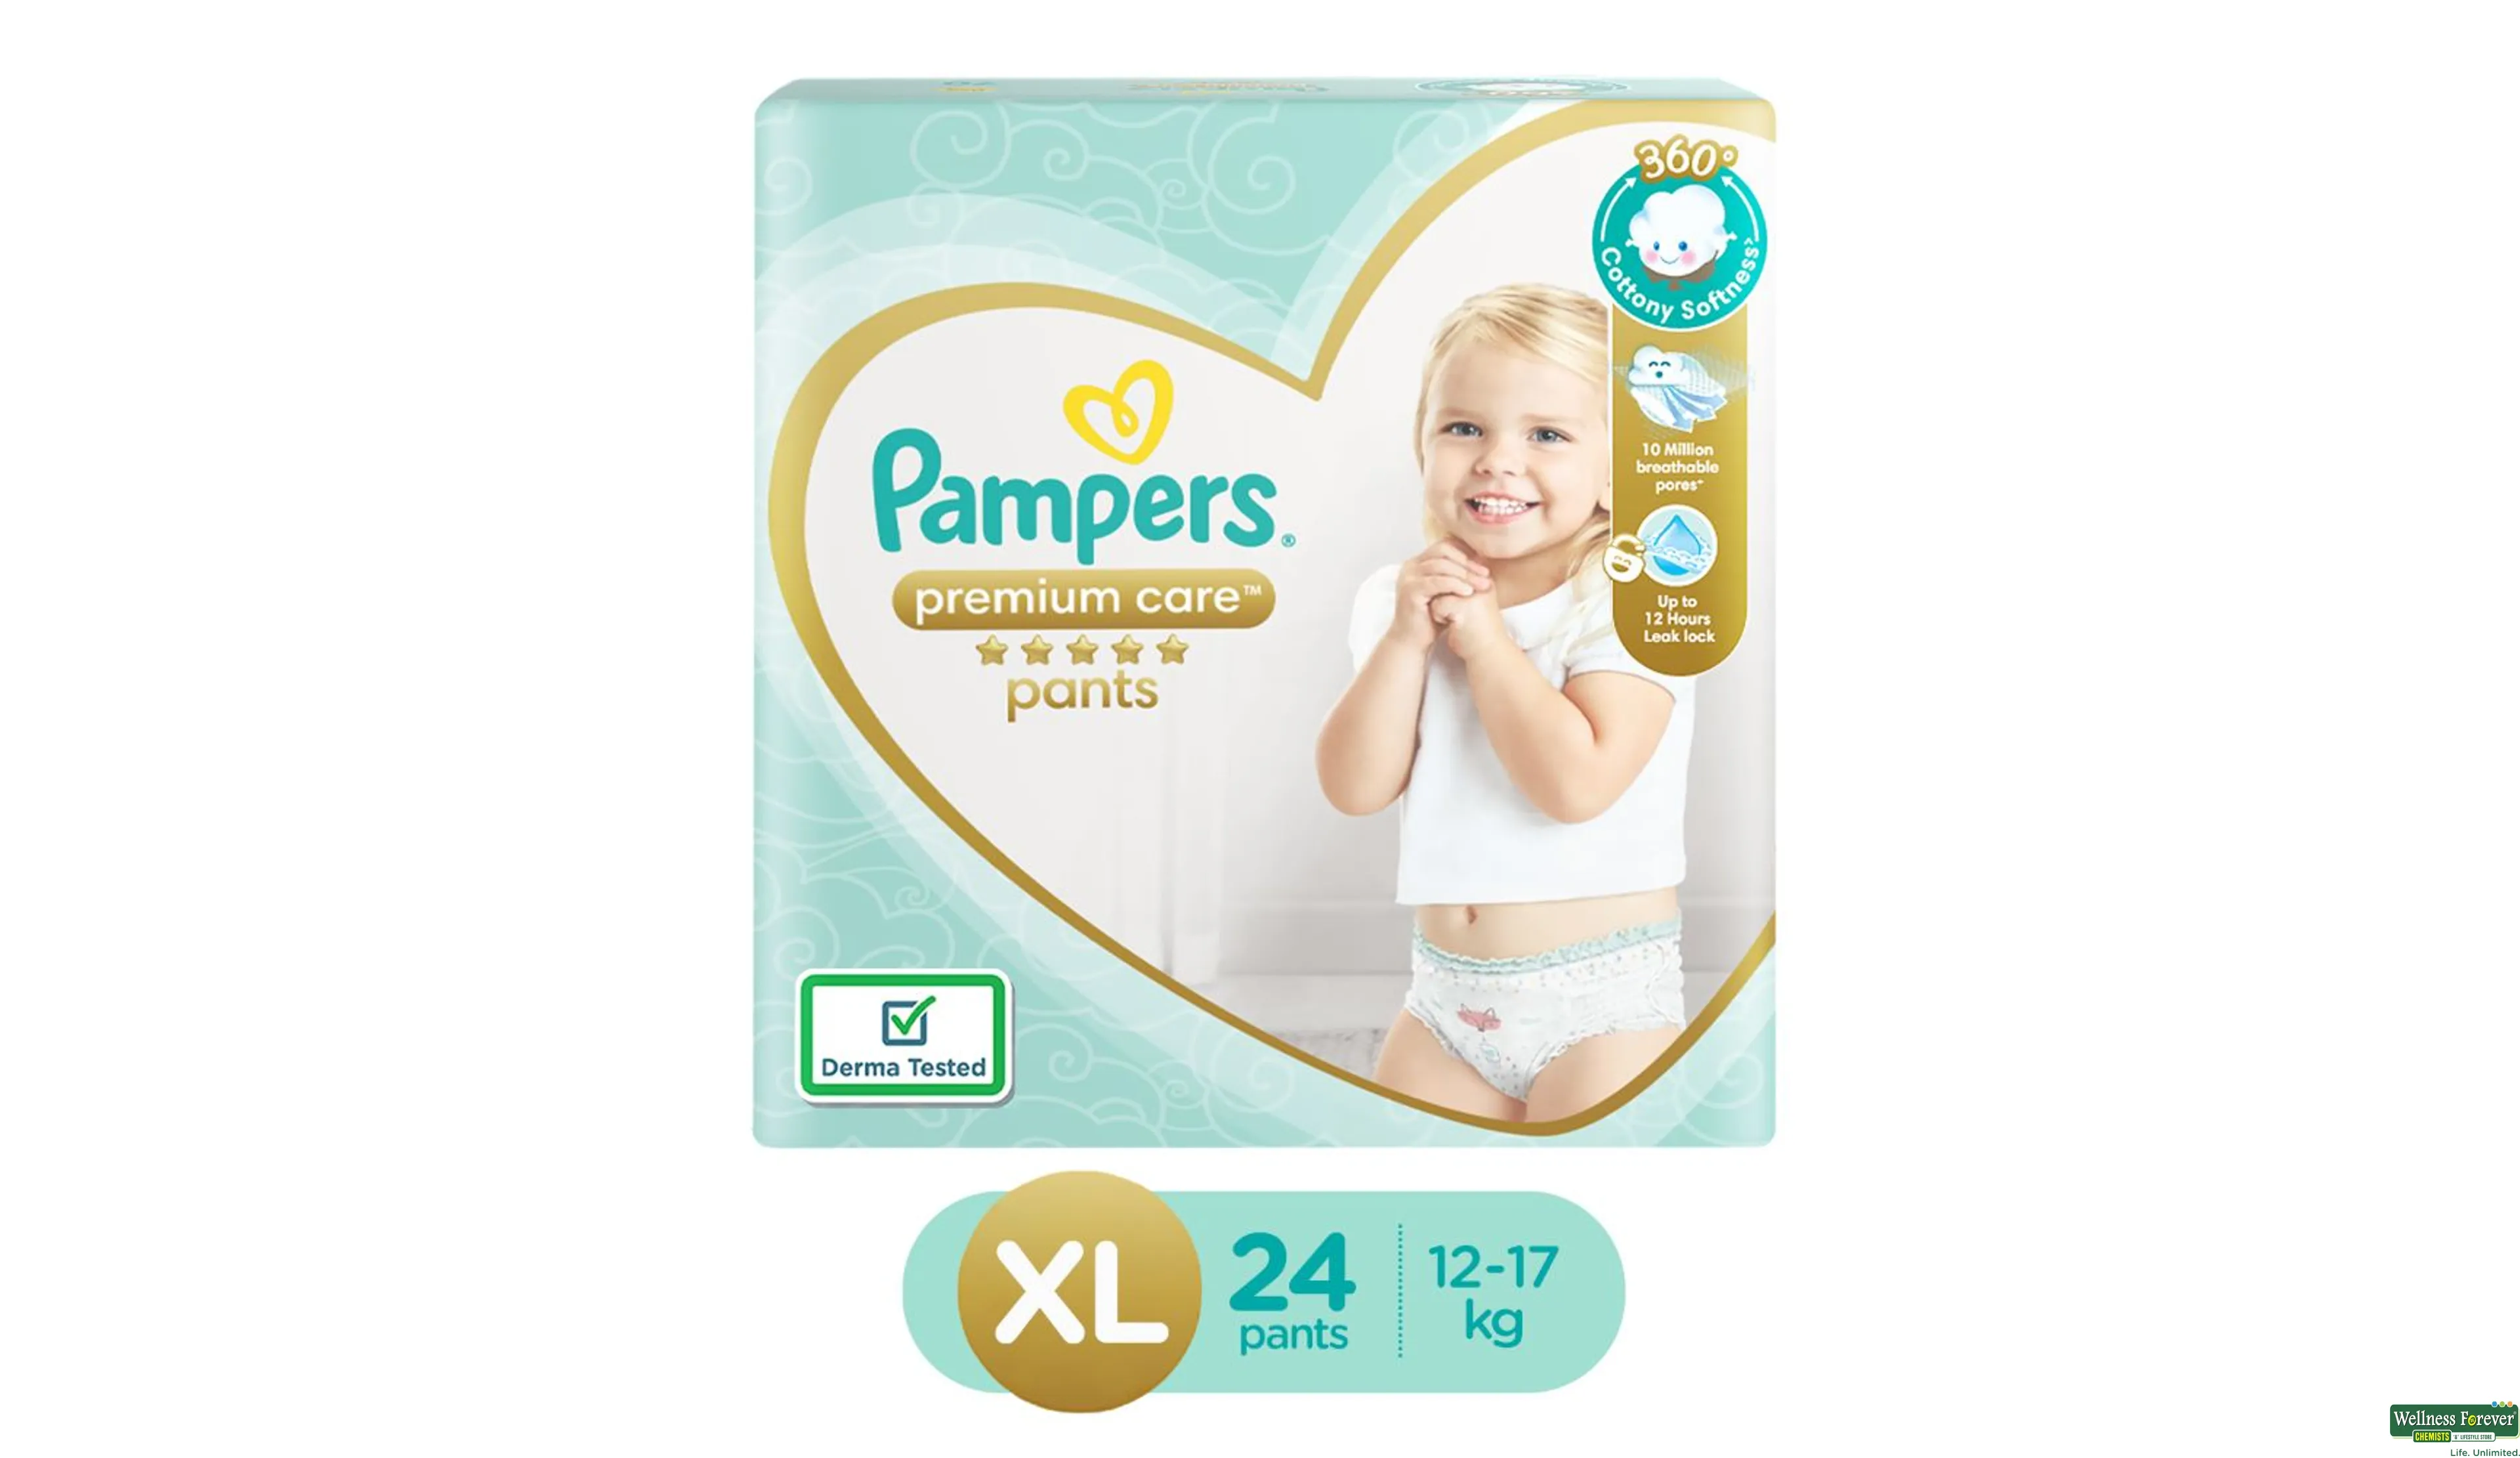 Diapers | Pampers premium Care Pants | Freeup